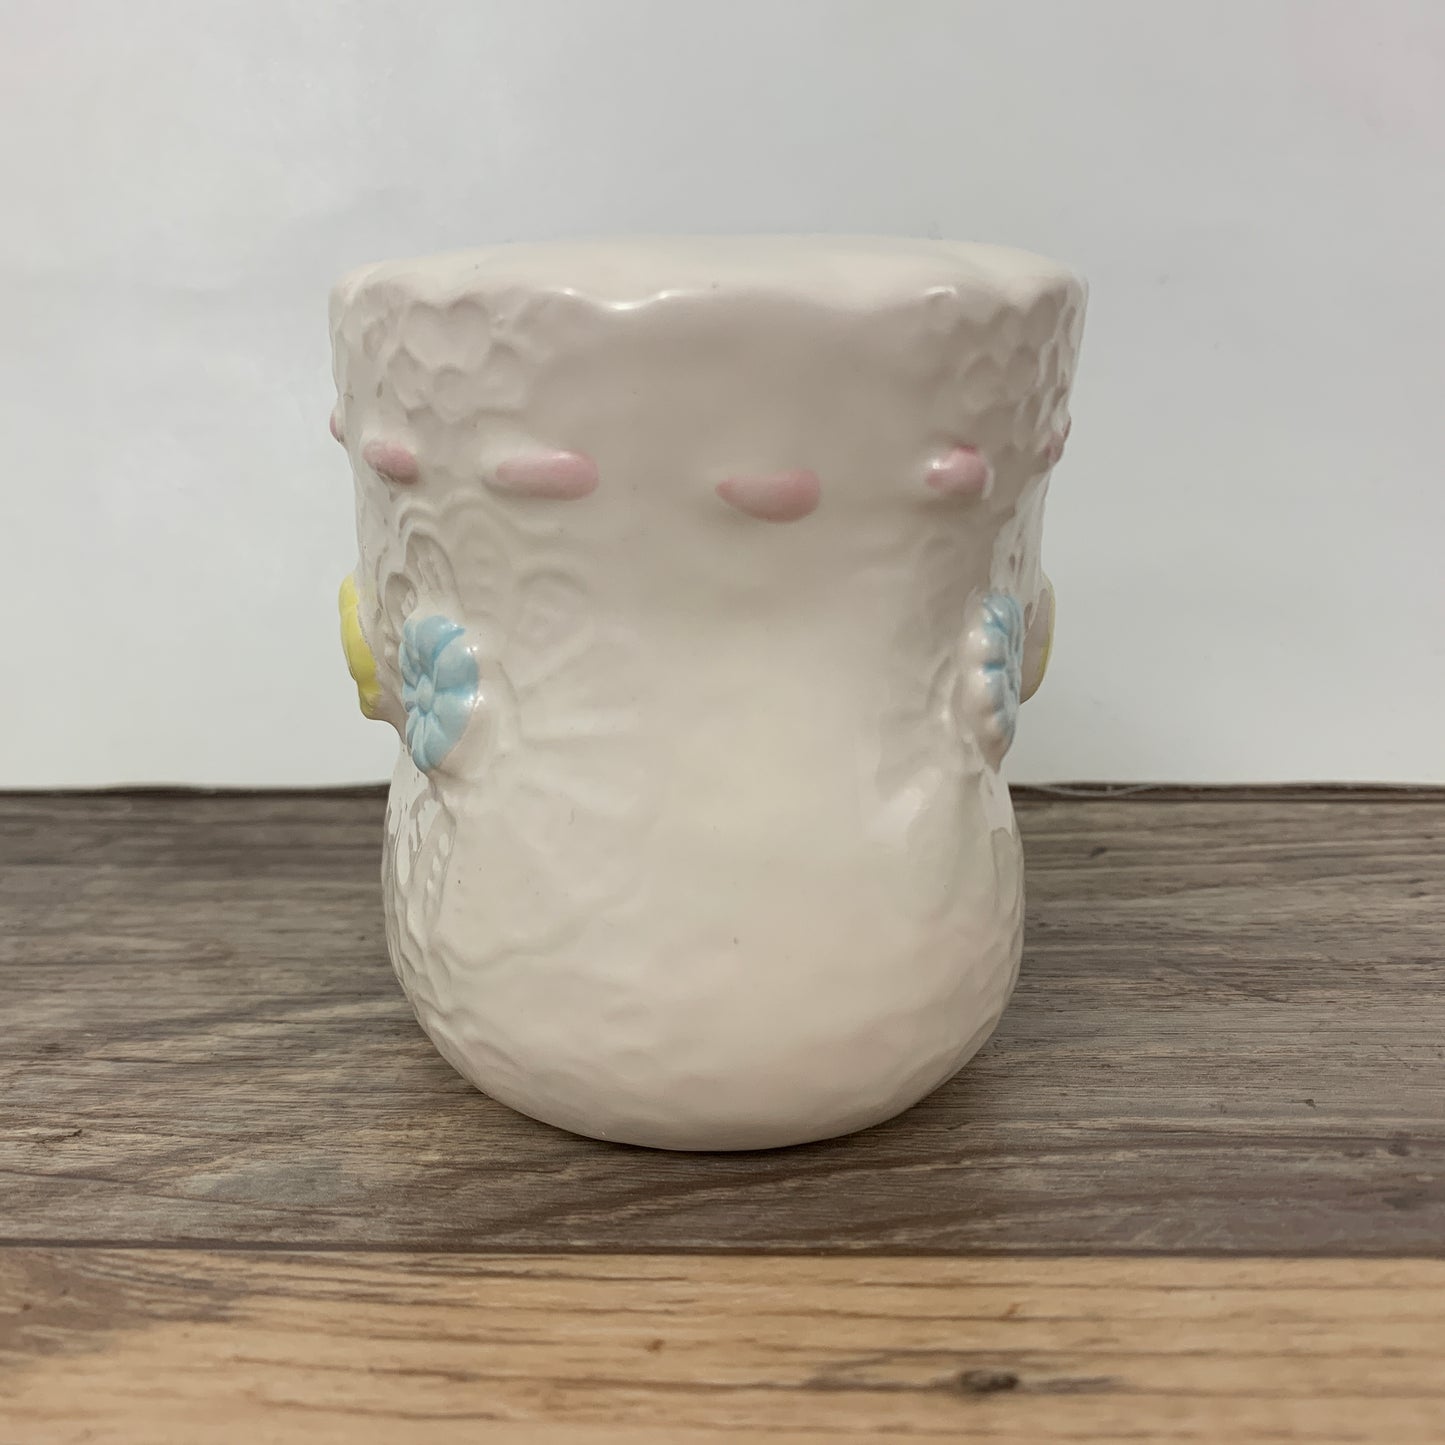 Ceramic Baby Bootie Coin Bank, Vintage Baby Shower Gift